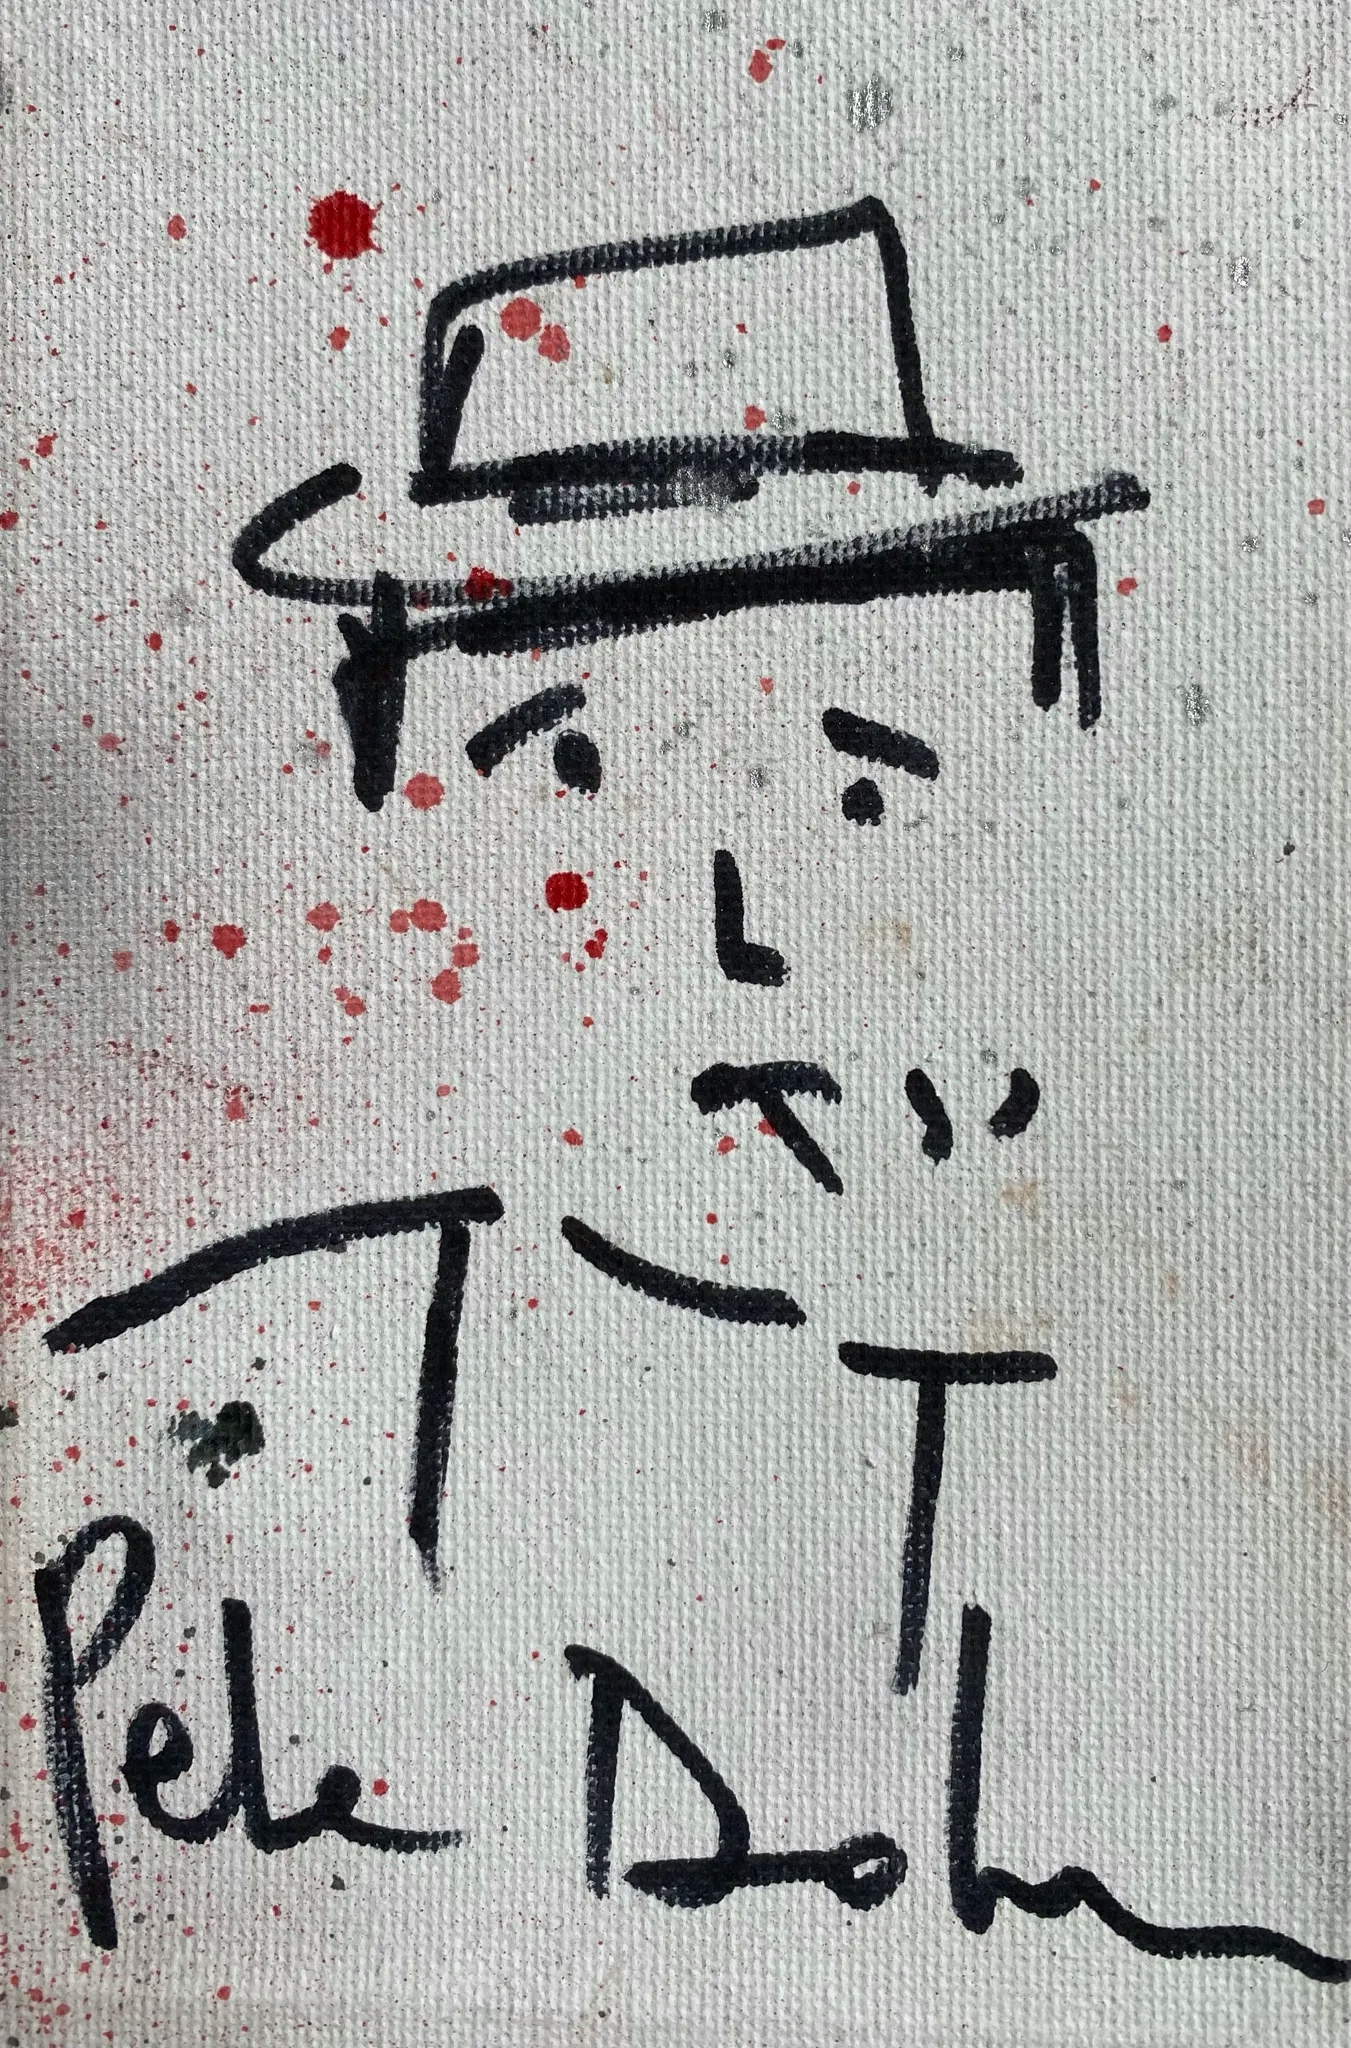 Album artwork for A Likely Lad by Peter Doherty with Simon Spence